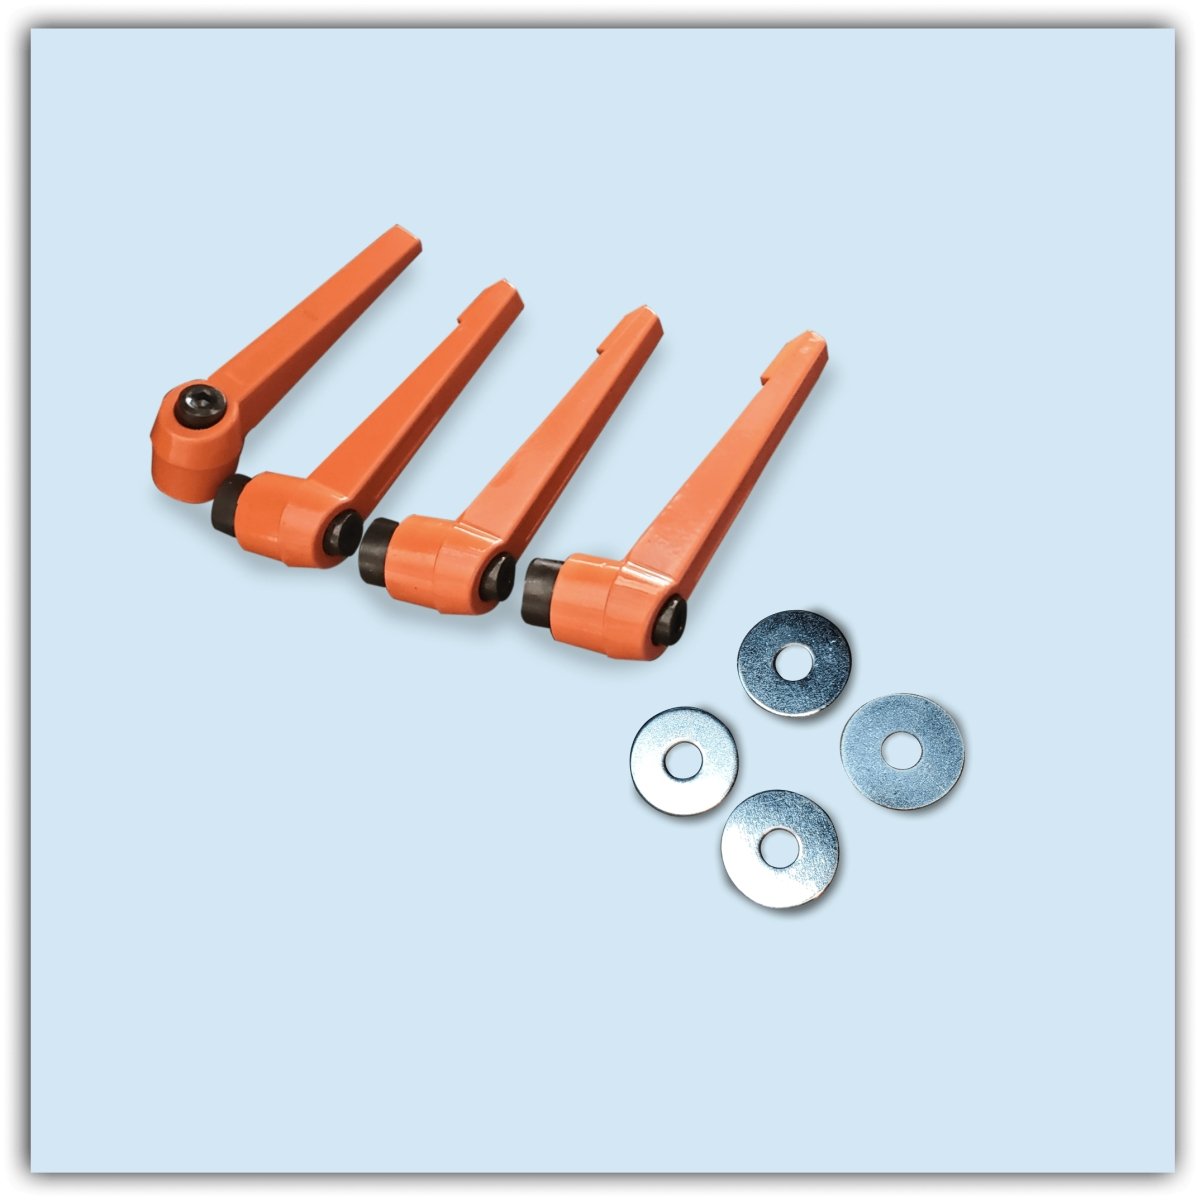 Additional Lever Handles Sets of (2) - RC Plane Stands